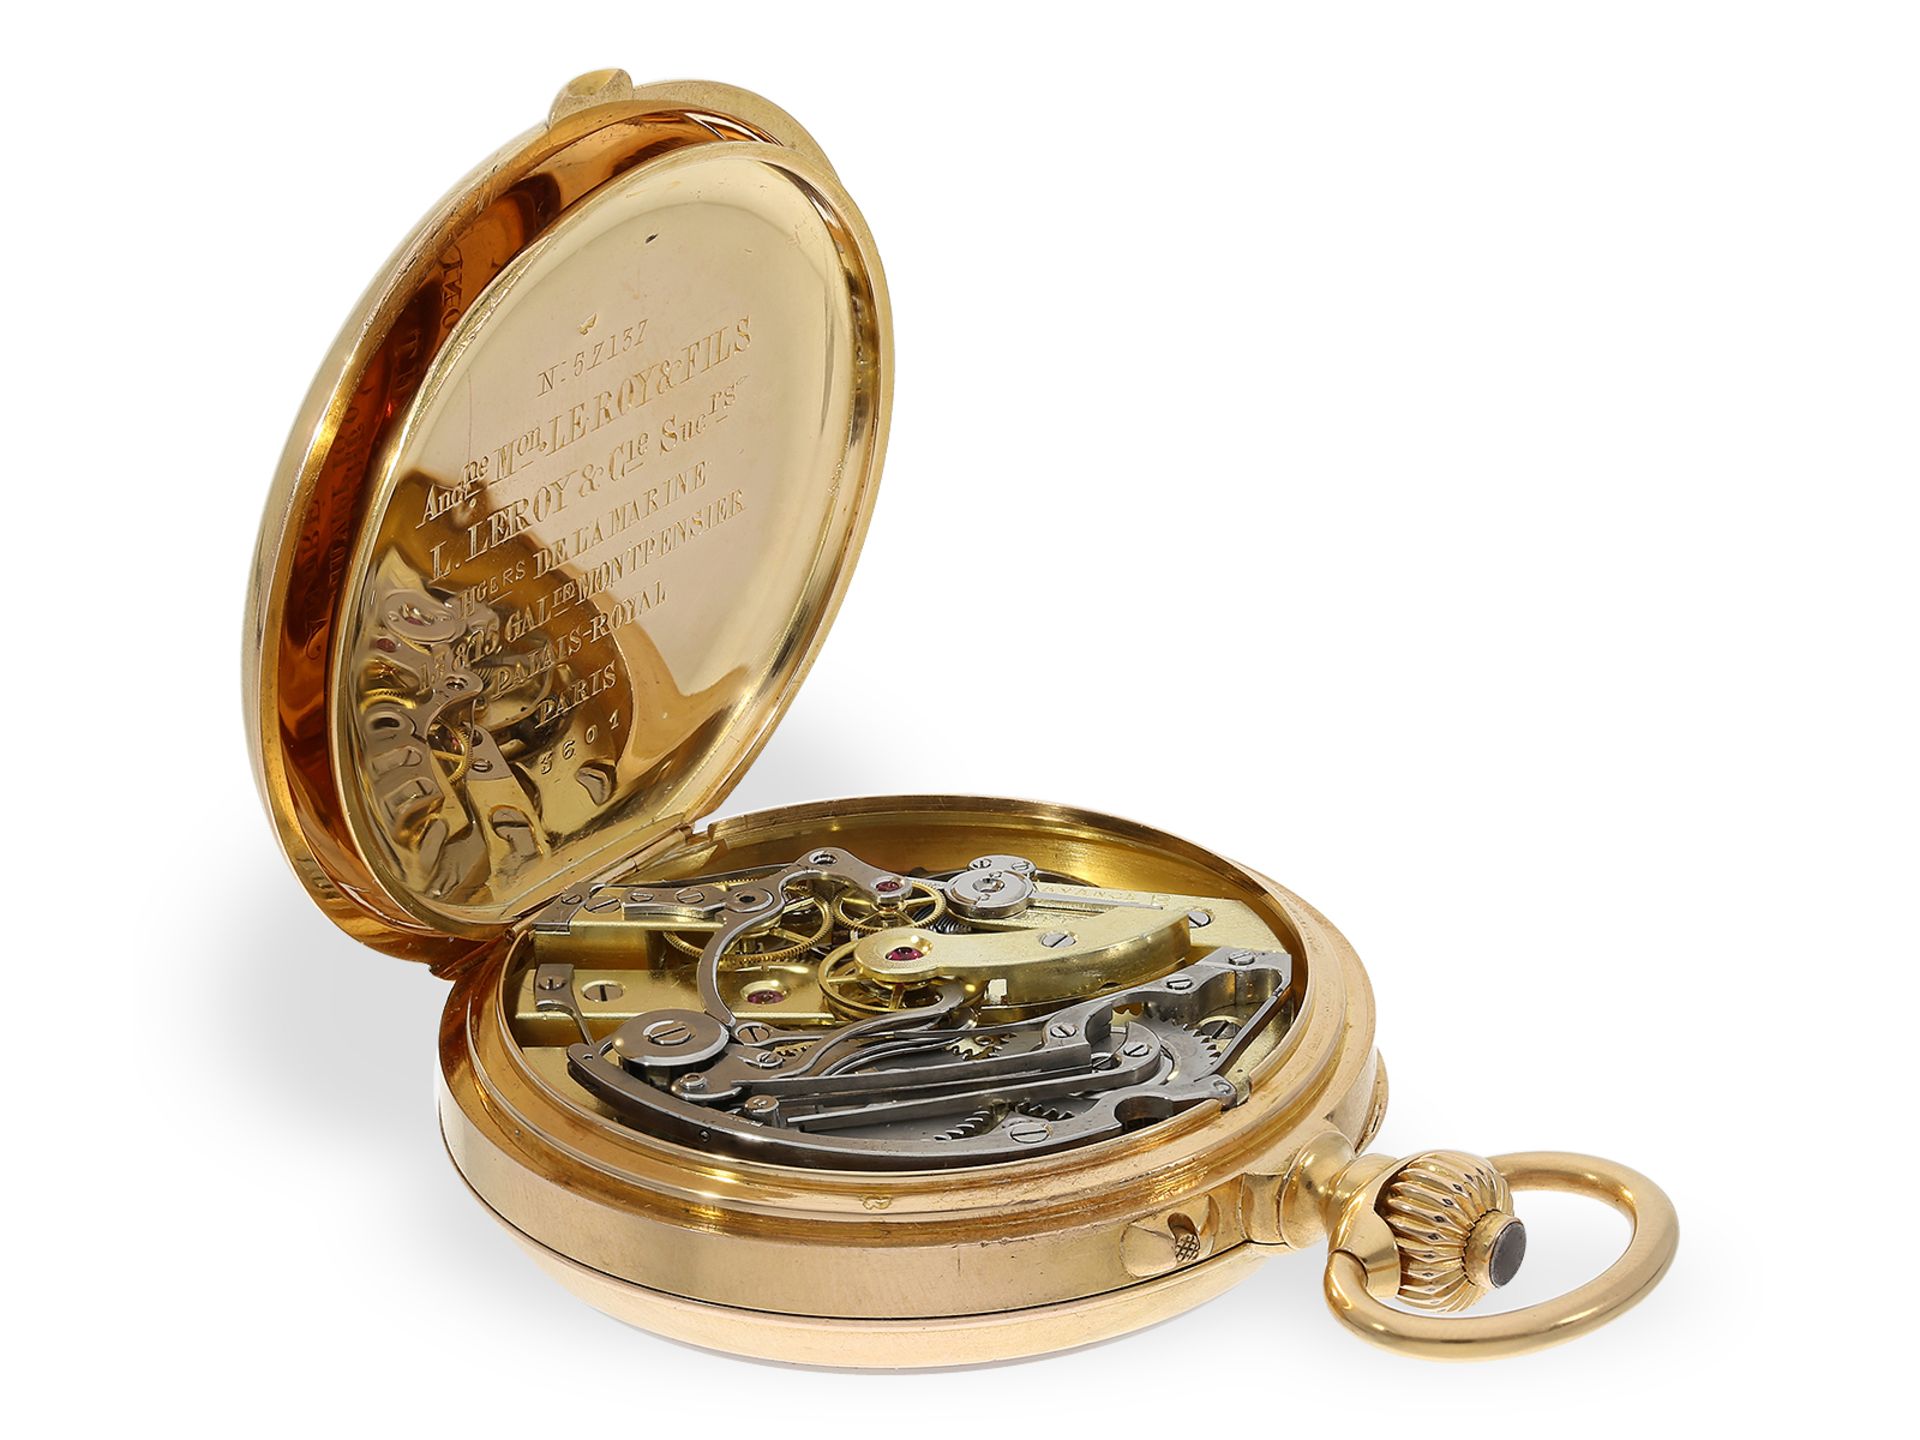 Pocket watch: important Le Roy chronometer with chronograph and central counter, No.57137-3601, ca. - Image 4 of 6